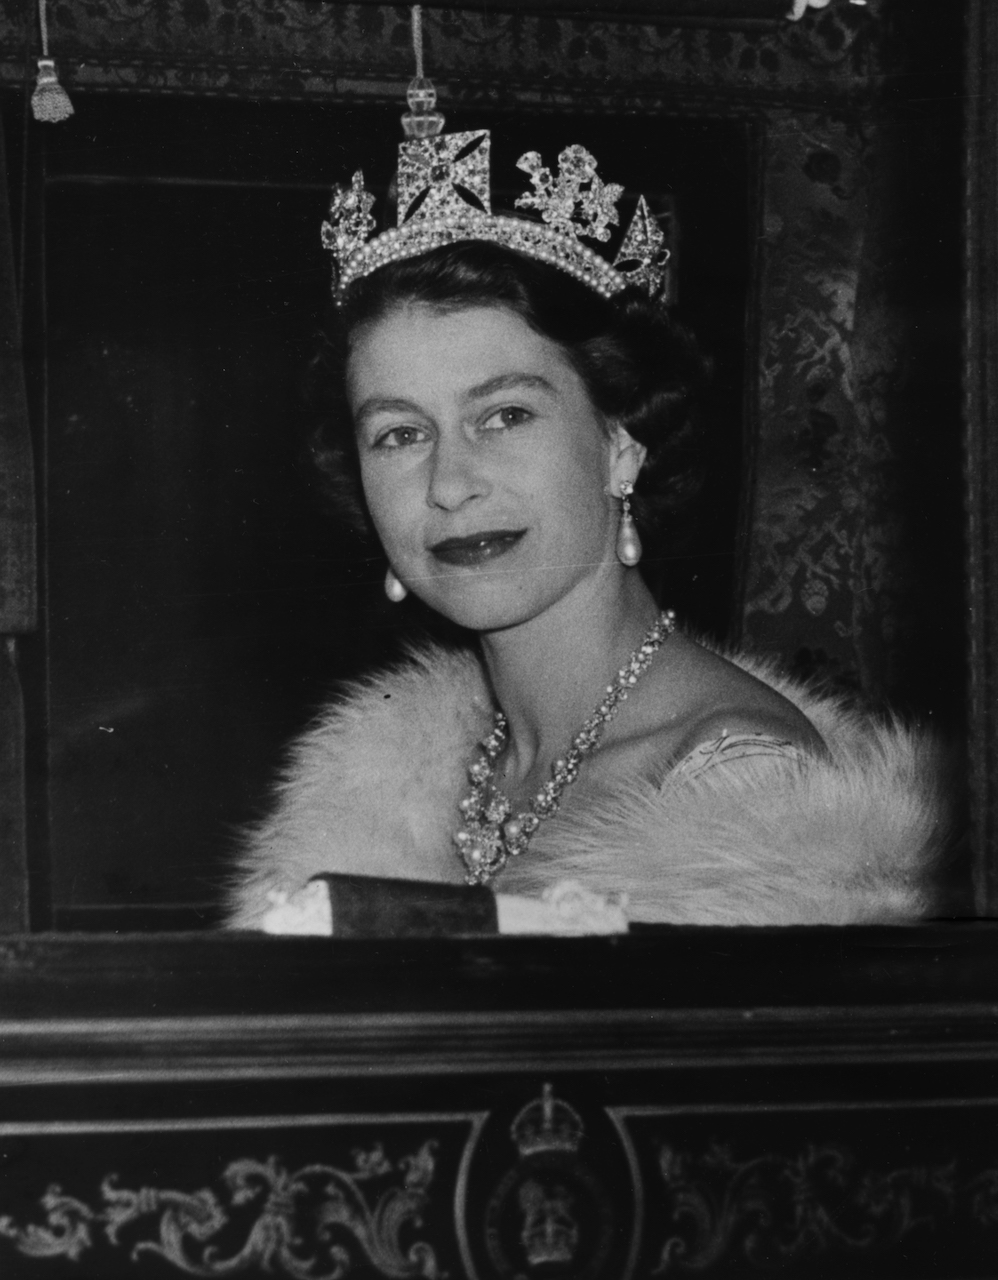 Queen Elizabeth's Most Remarkable Jewelry, Crowns and Tiaras